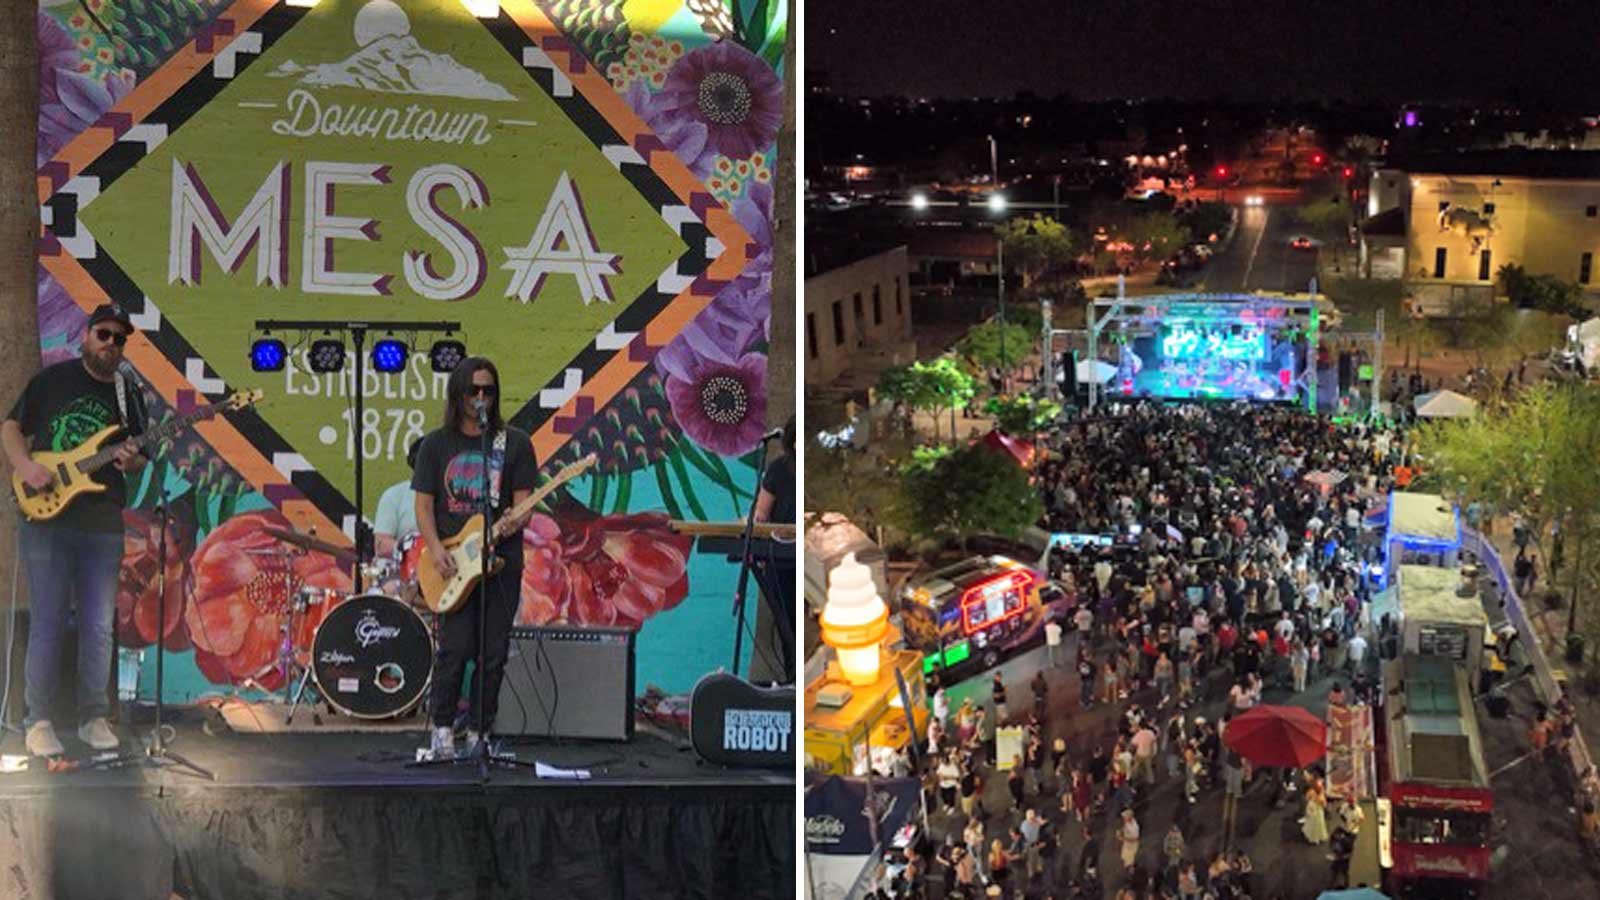 Split image with a band playing in front of a Mesa mural on the left and an aerial view of the Mesa...